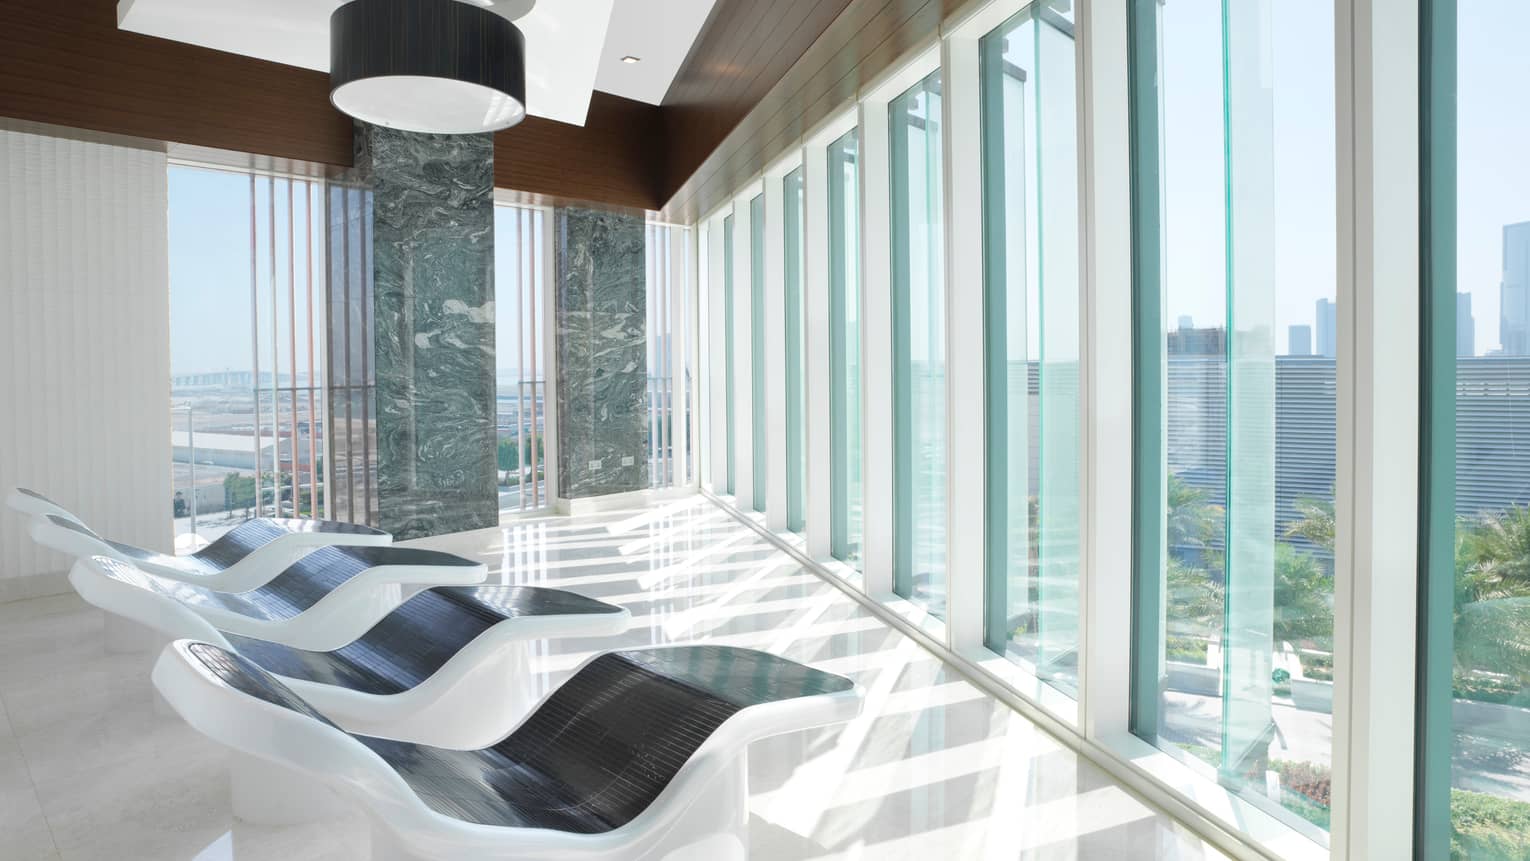 White-and-black recliners in front of floor-to-ceiling glass windows in bright relaxation room